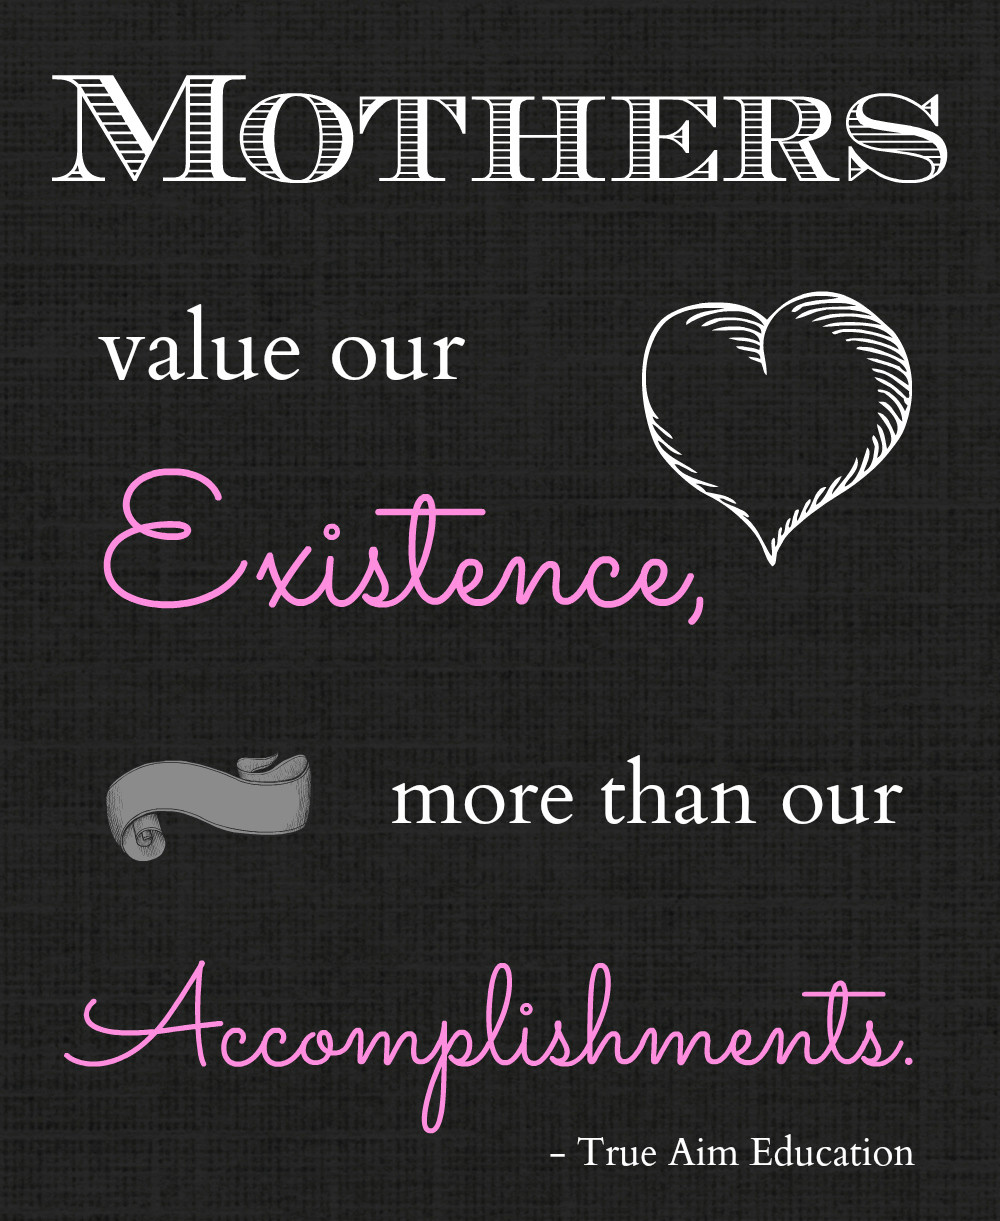 Working Mother Quotes
 Quotes About Hard Working Mothers QuotesGram